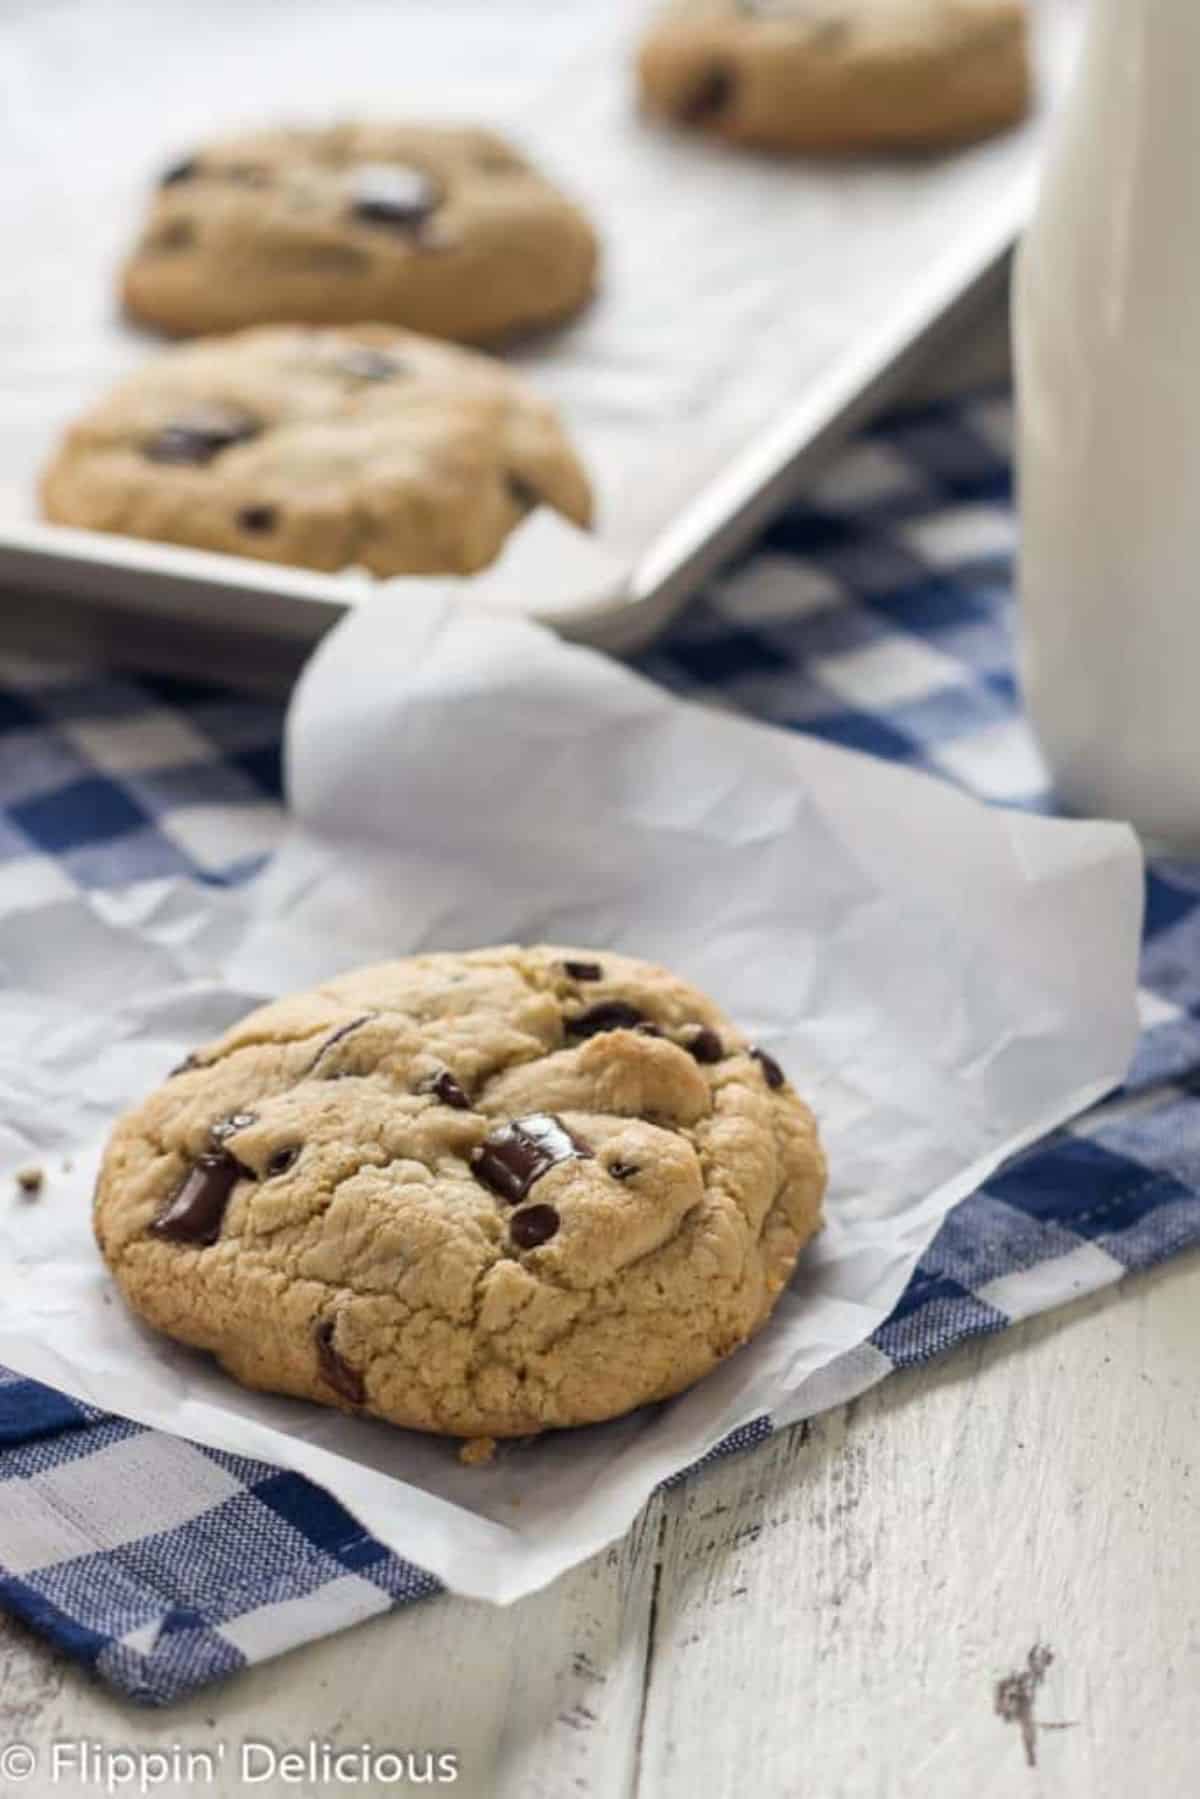 Crunchy Gluten-Free Chocolate Chip Cookies on a table.